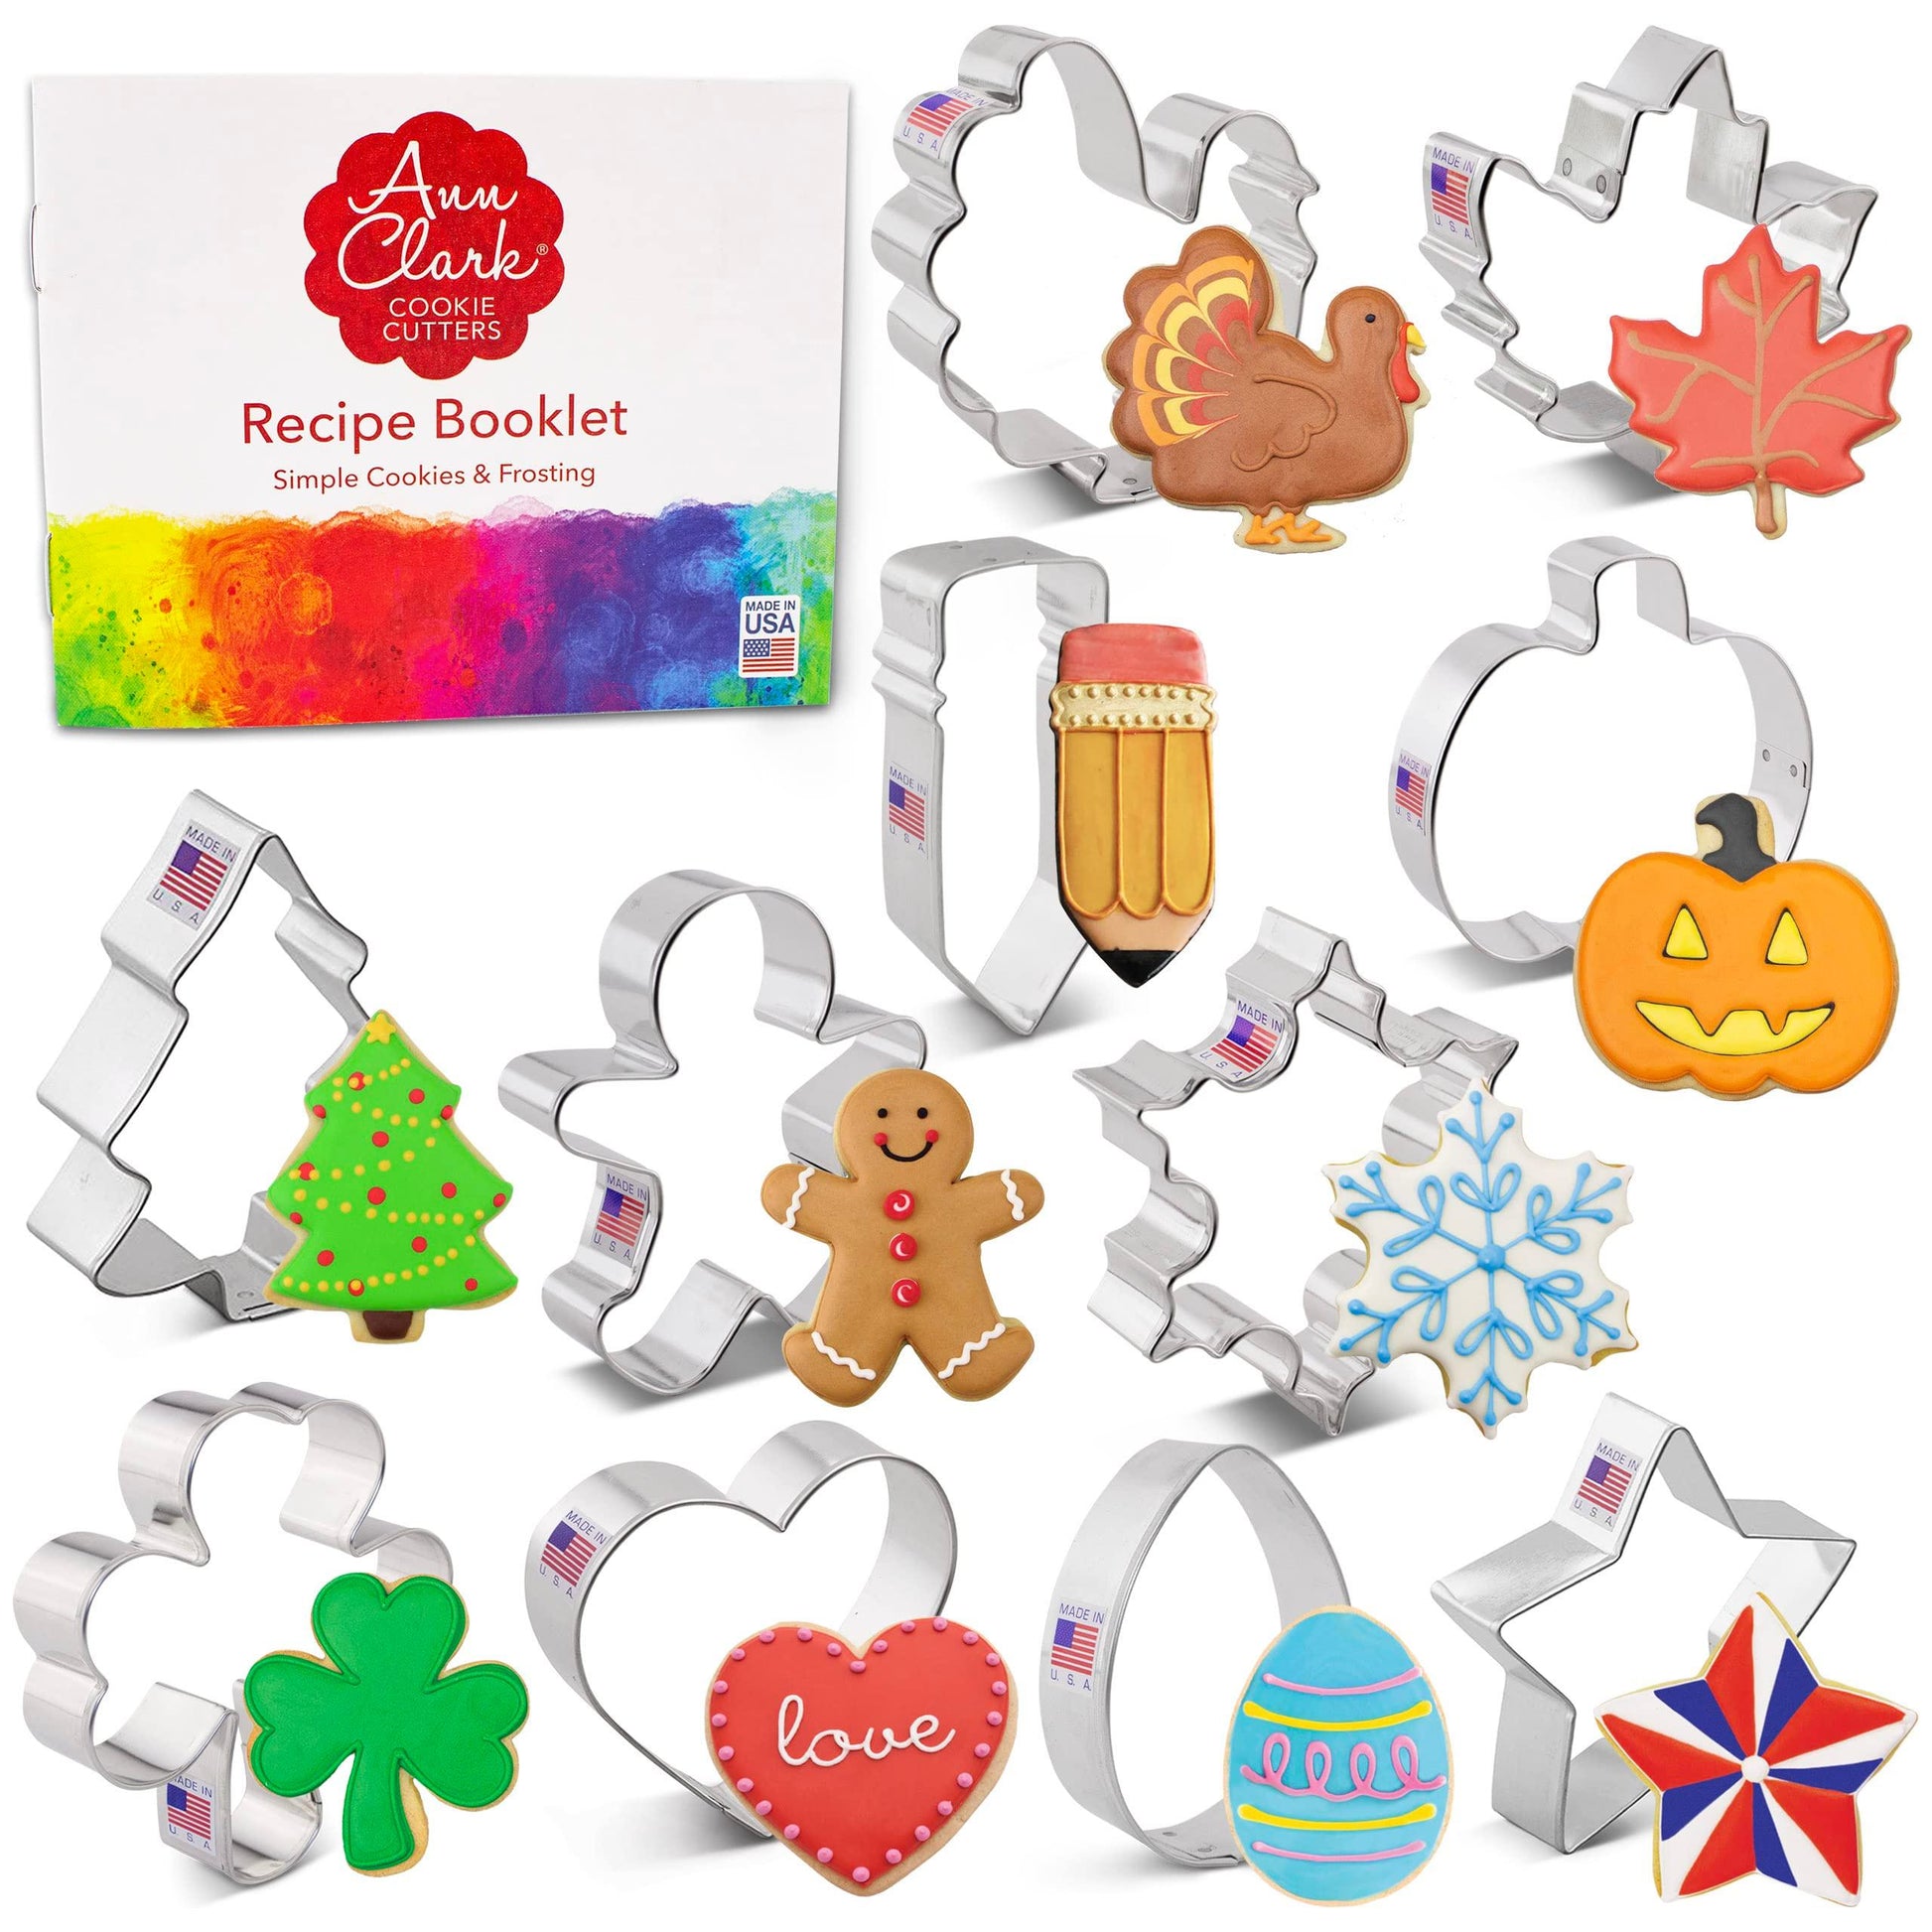 Cookie Cutters for Christmas and Every Season: 11-pc. Christmas, Easter, Halloween, St. Patrick's Day & More Made in USA by Ann Clark Cookie Cutters - CookCave